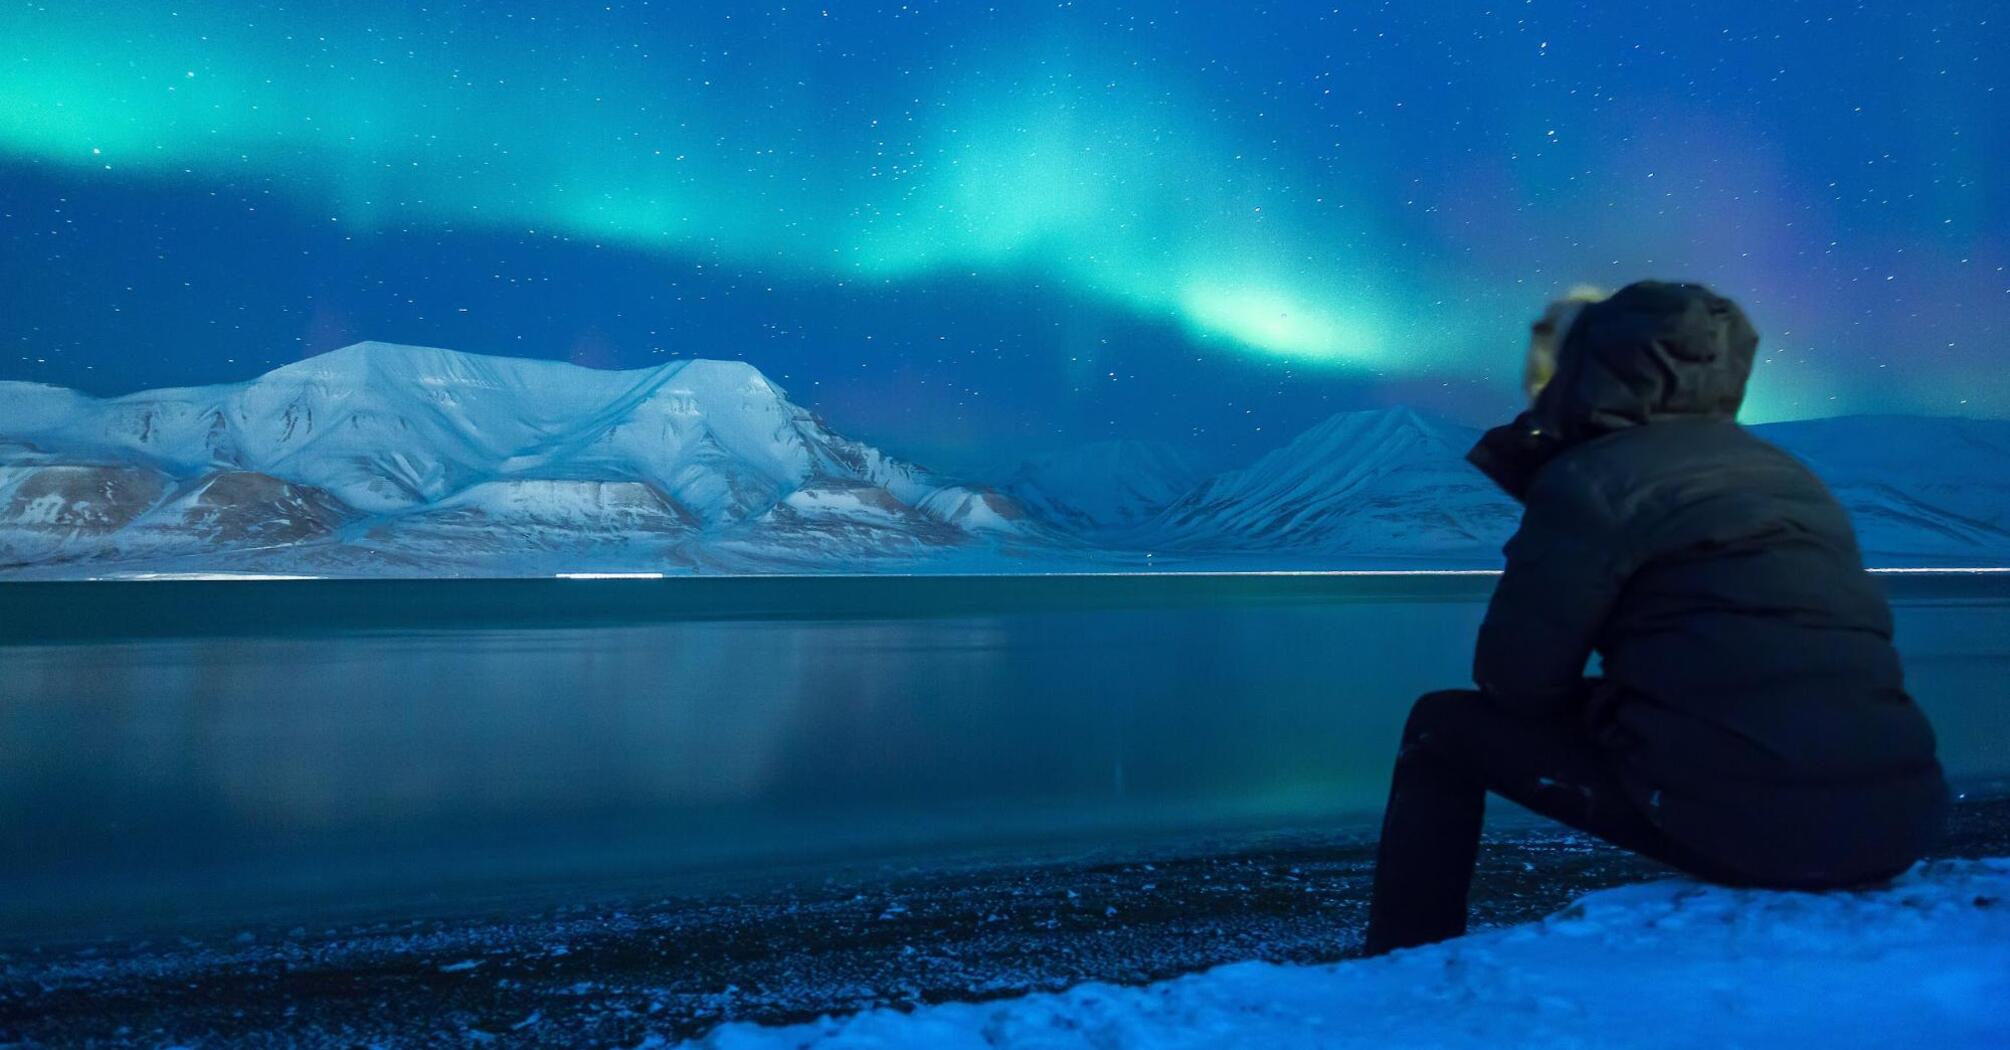 Man sits by a lake with the northern lights in the sky